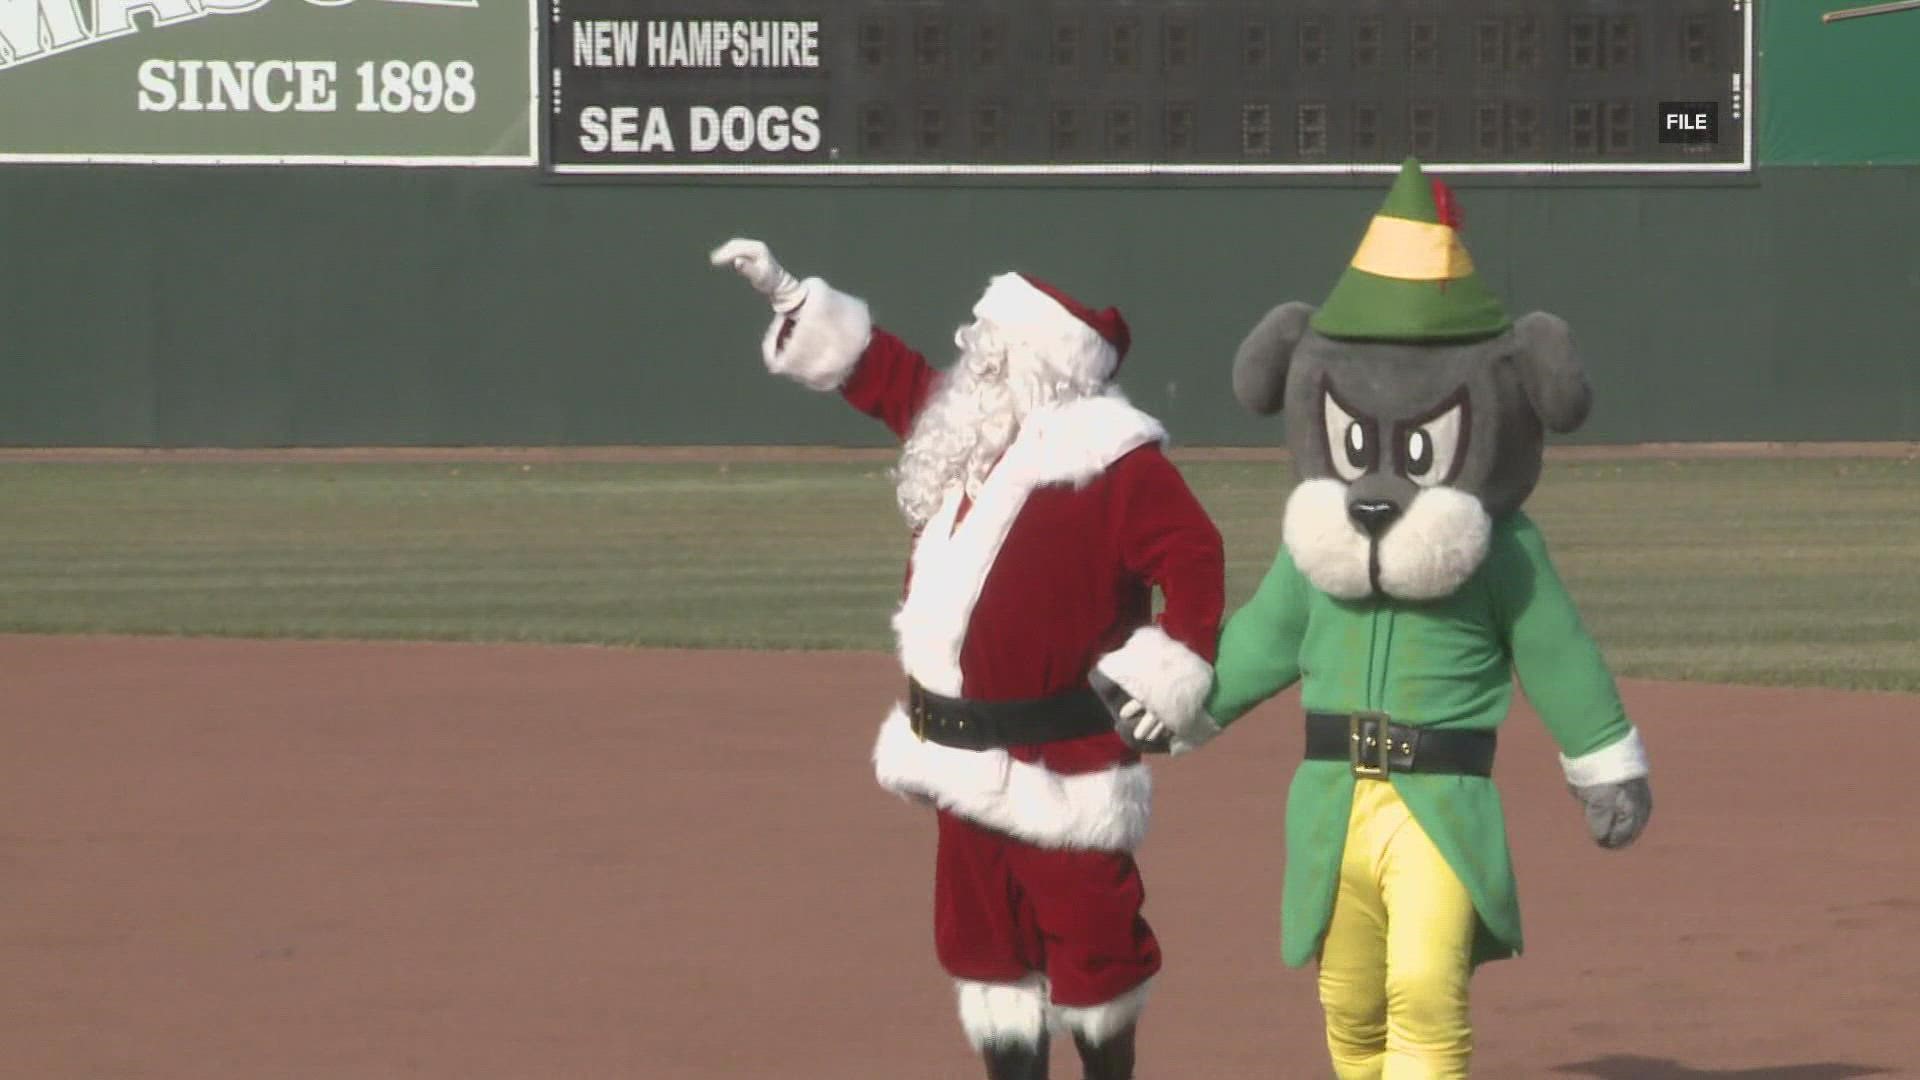 The Portland Sea Dogs will be hosting a visit from Santa Claus amid other activities on Saturday.